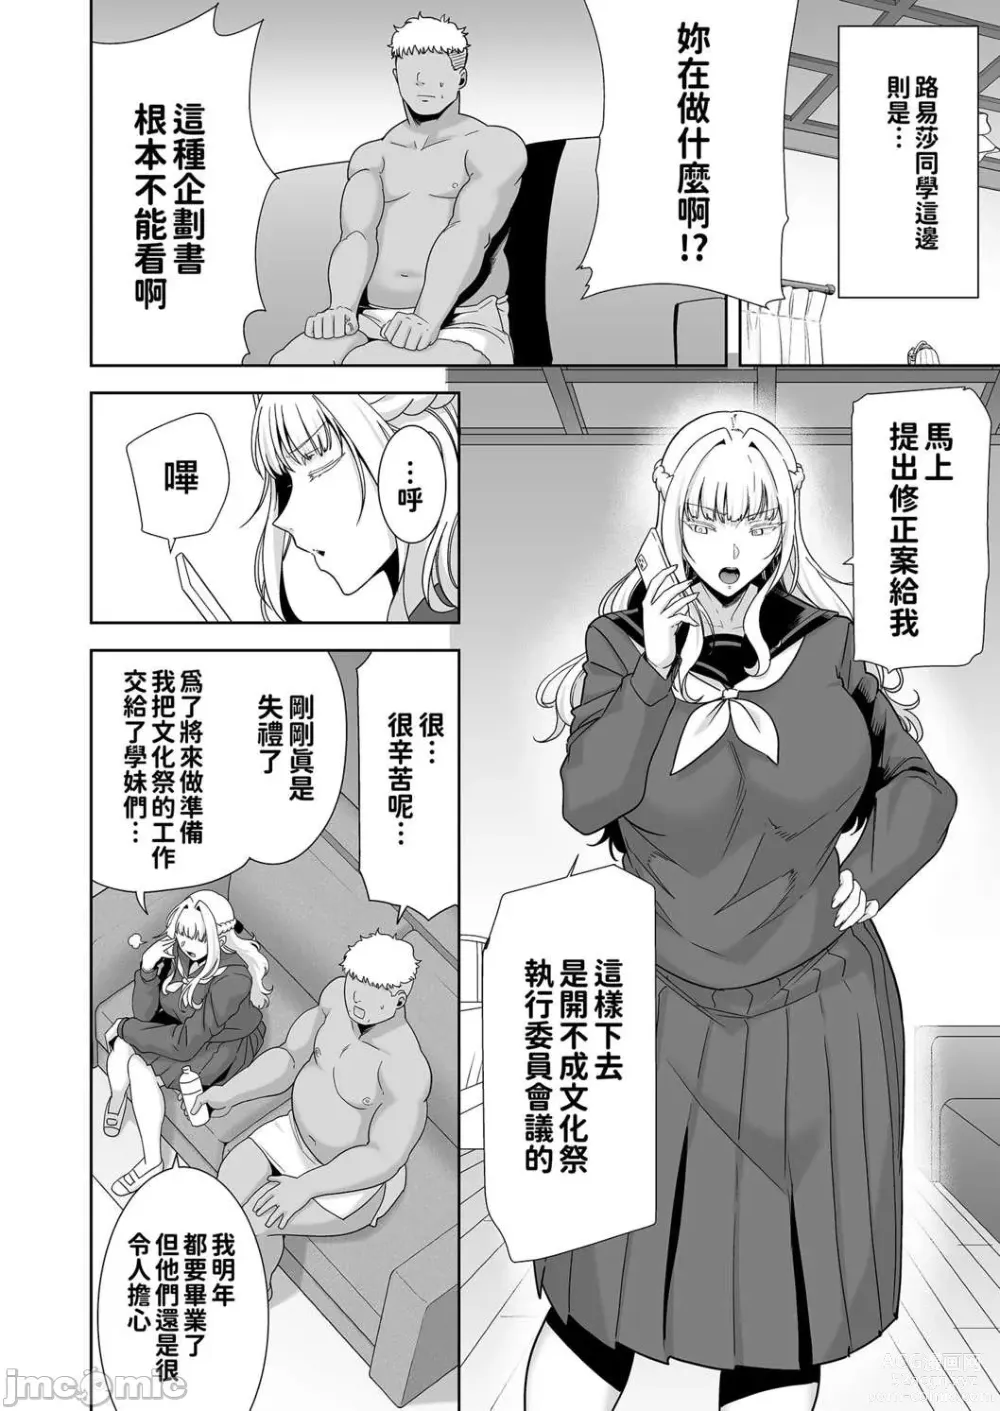 Page 36 of doujinshi 聖華女学院高等部公認竿おじさん 5